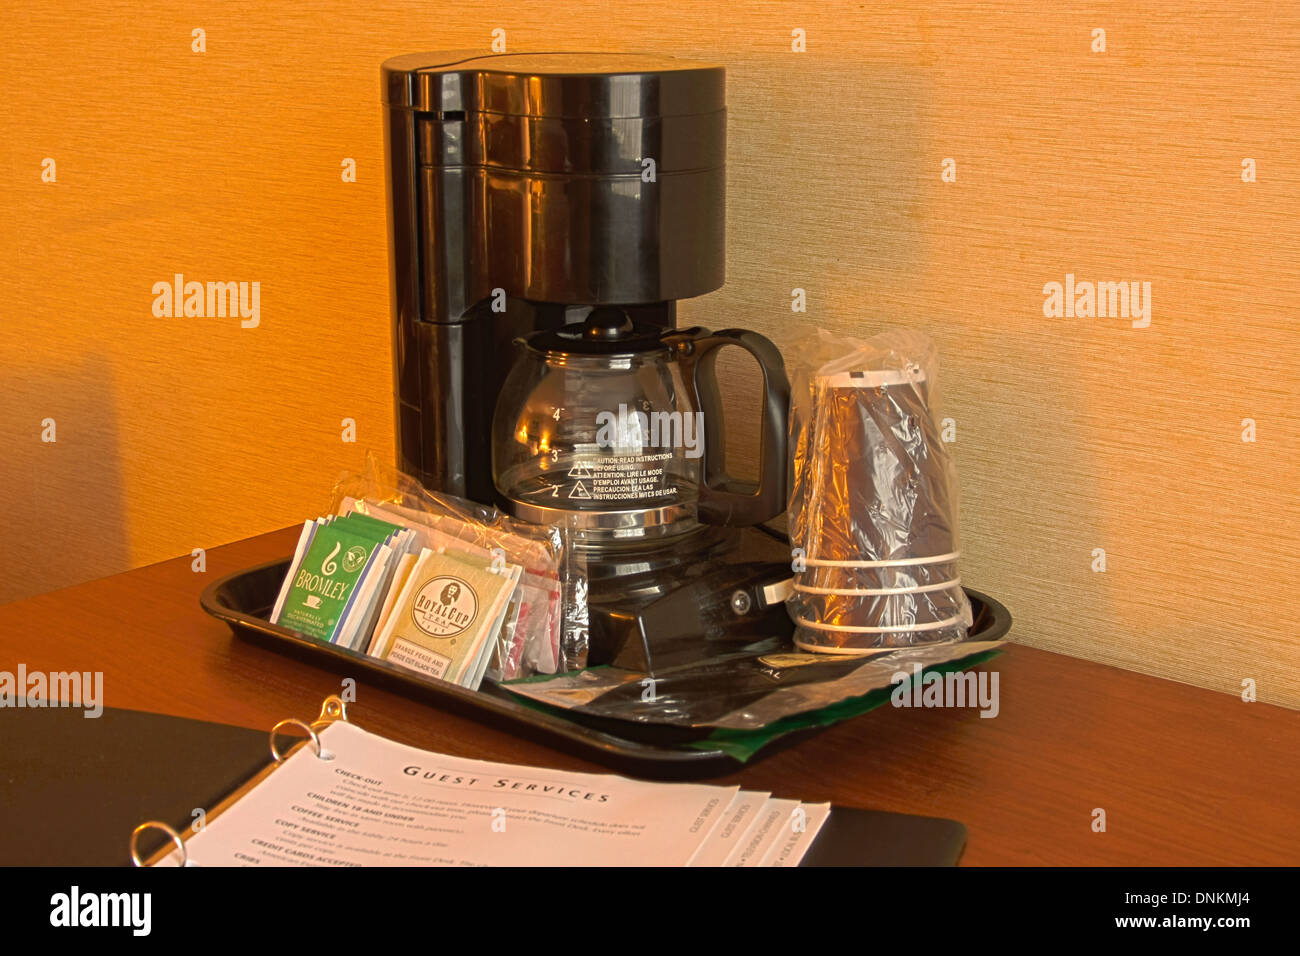 https://c8.alamy.com/comp/DNKMJ4/guest-services-brochure-in-a-hotel-room-next-to-the-coffee-maker-DNKMJ4.jpg